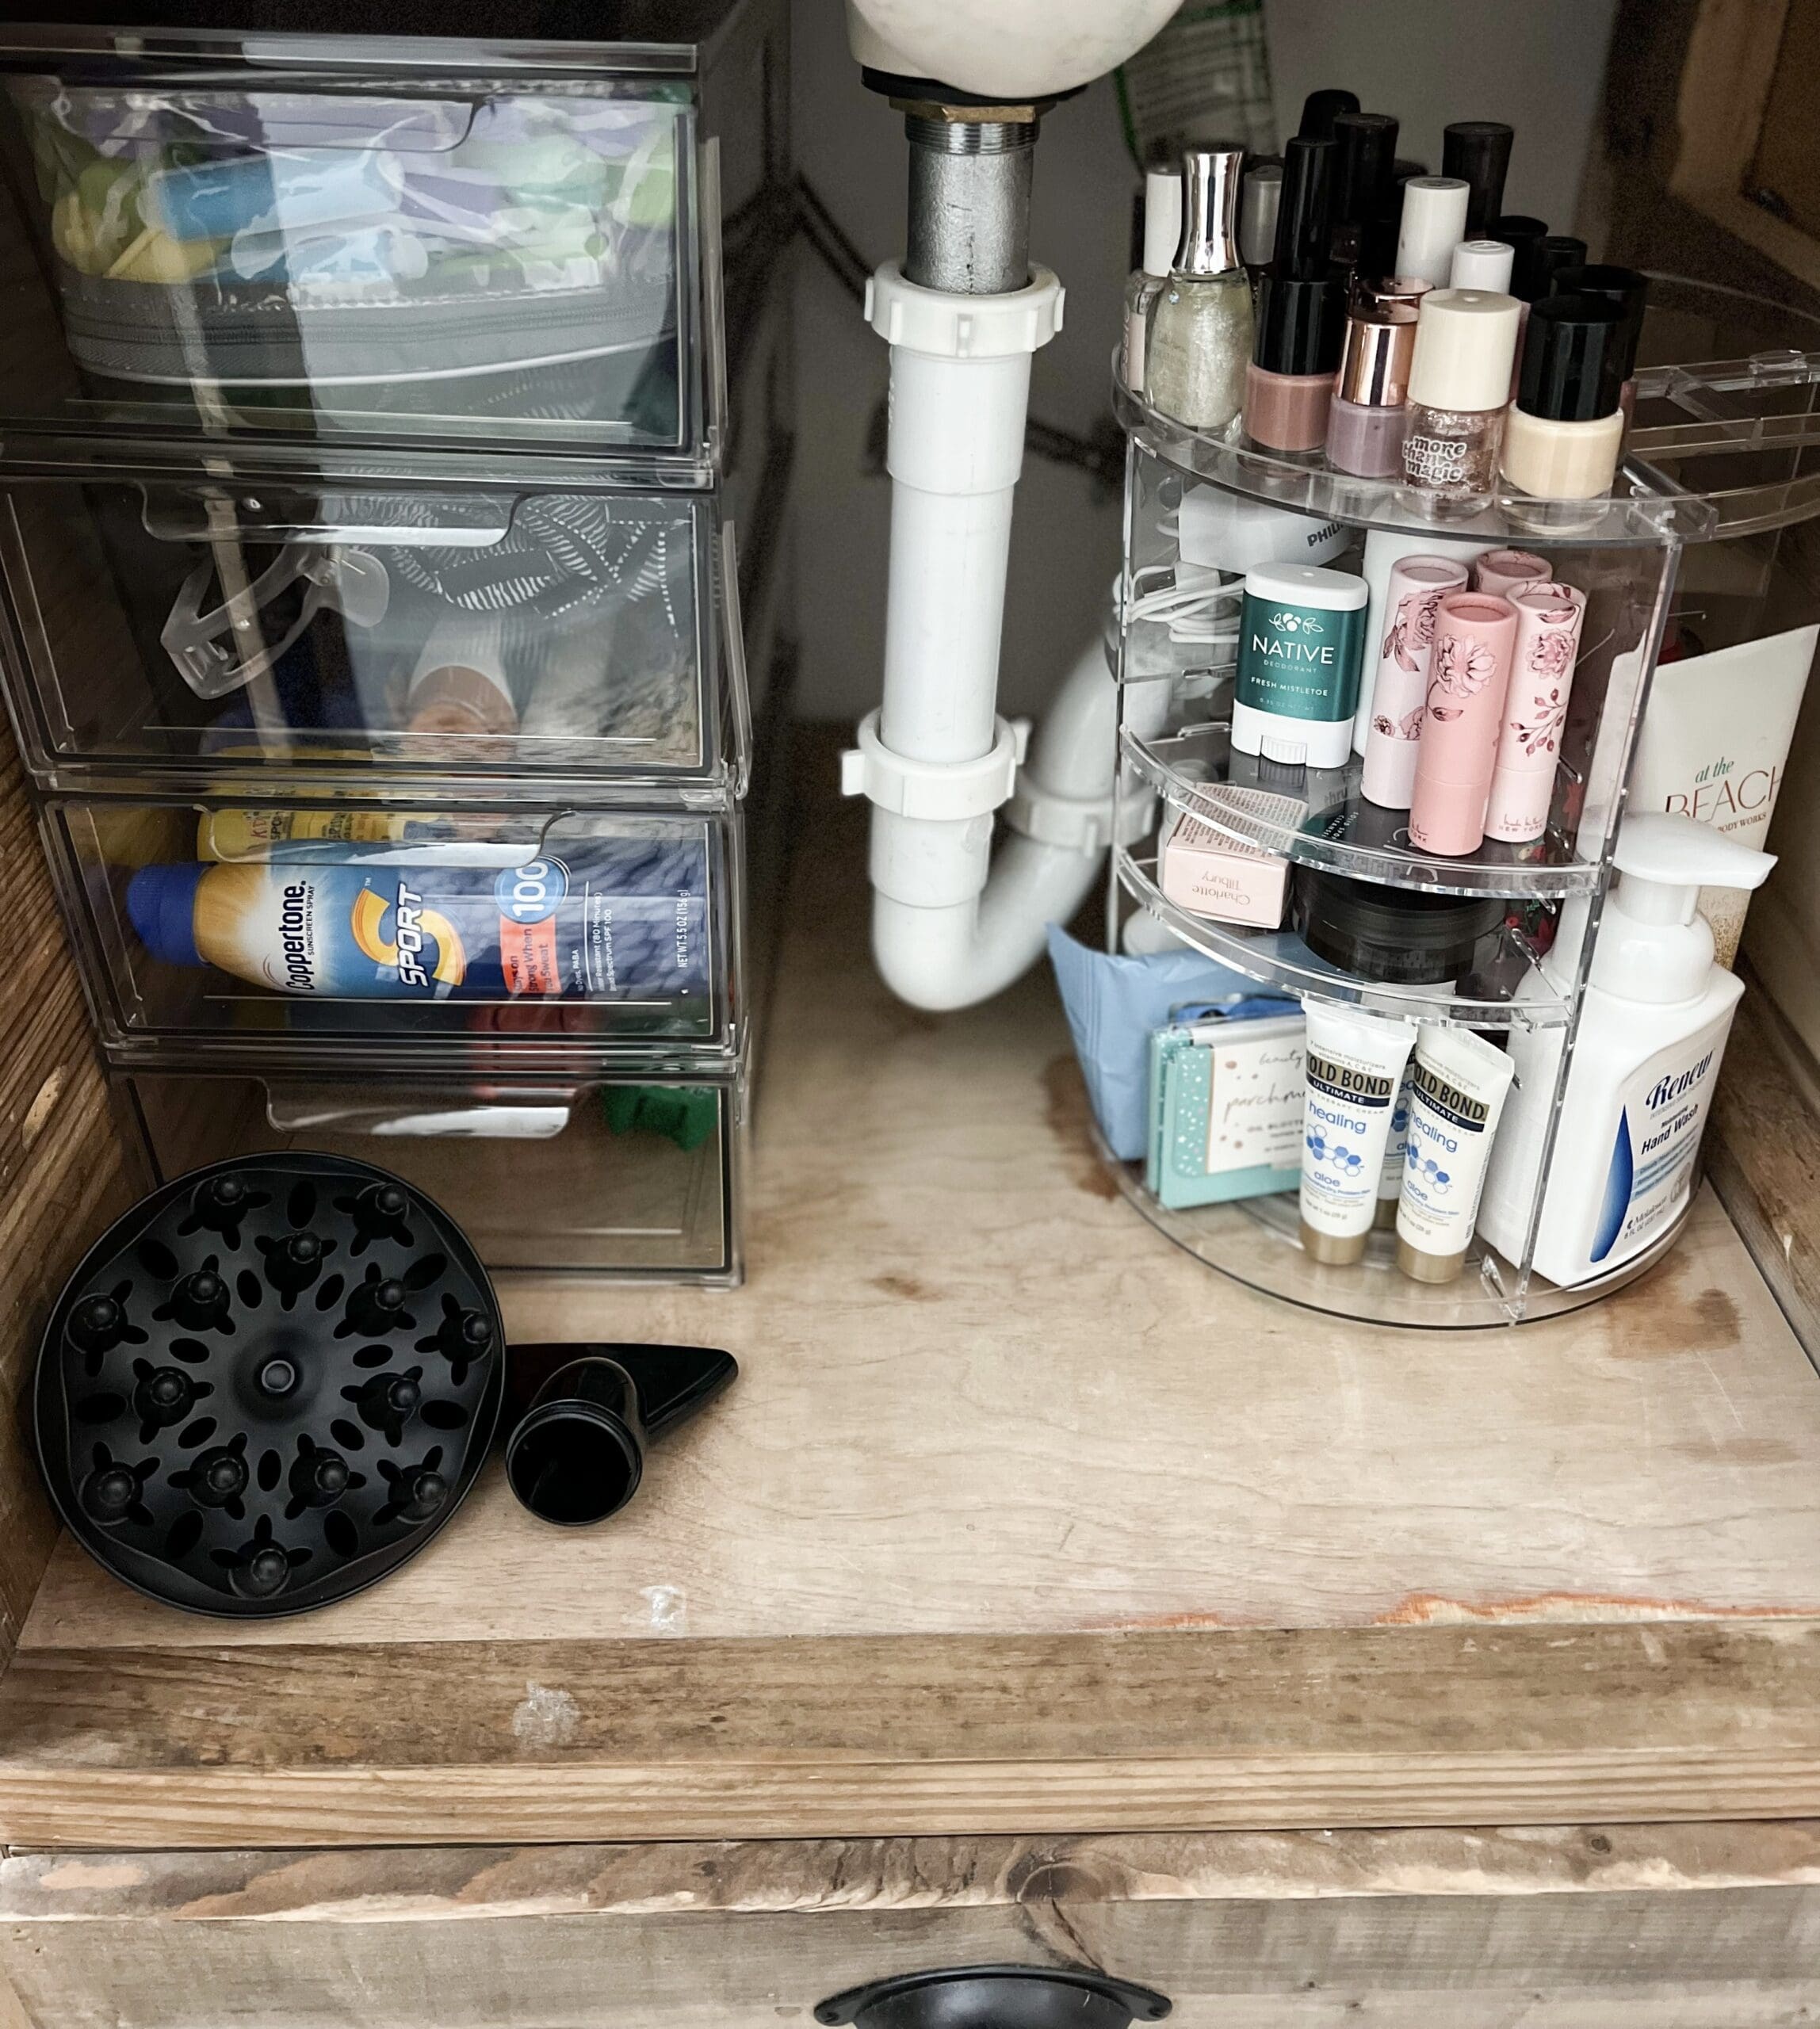 Plastic carousel & bins hold bathroom essentials neatly under on both sides of sink drain behind one open cabinet door.